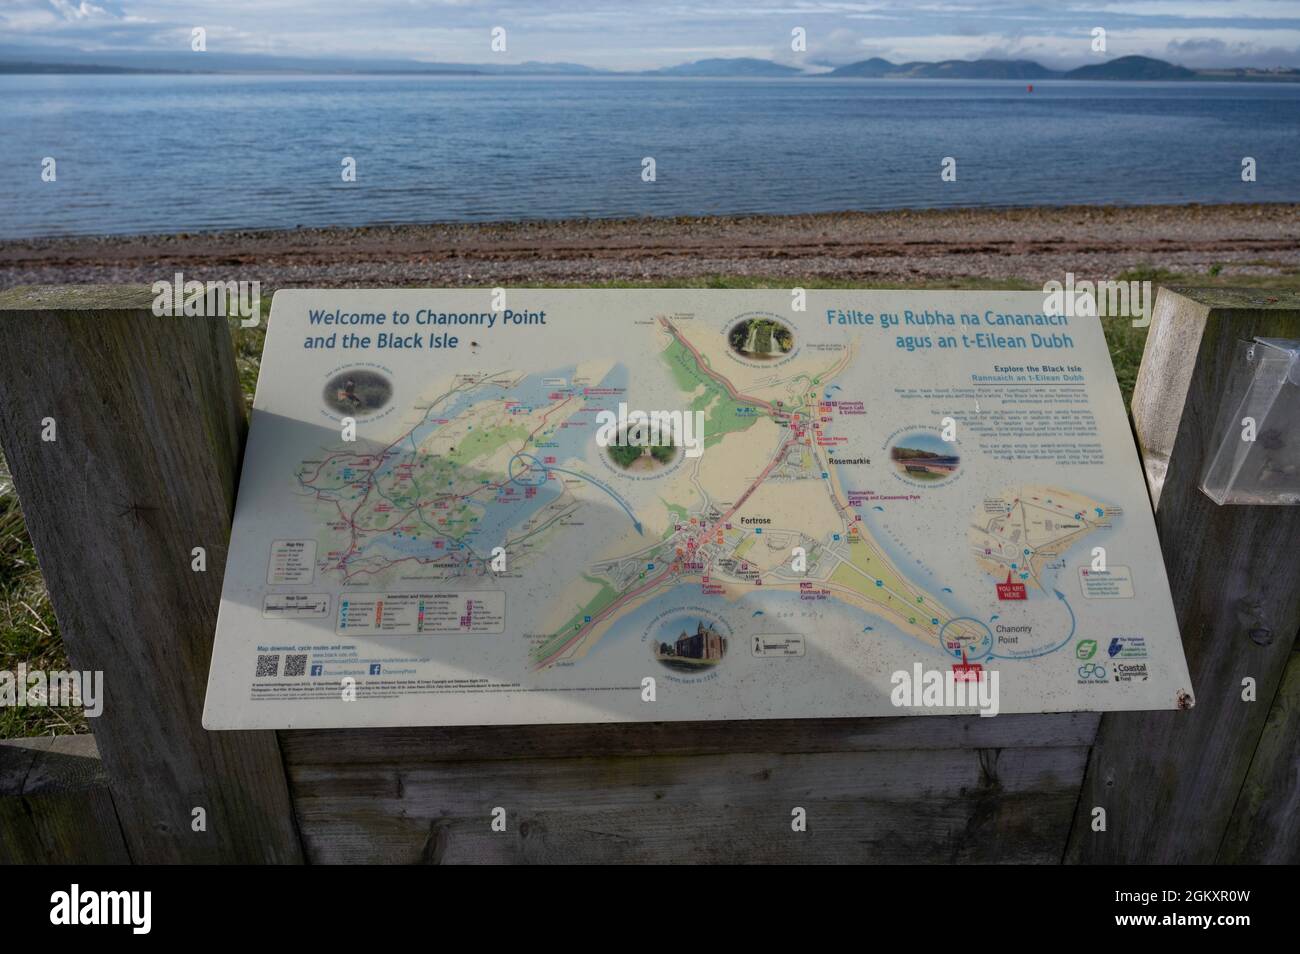 Welcome to Chanonry Point and the Black Isle sign with blurred background of beach and Moray Firth. Map with information, no people. Stock Photo